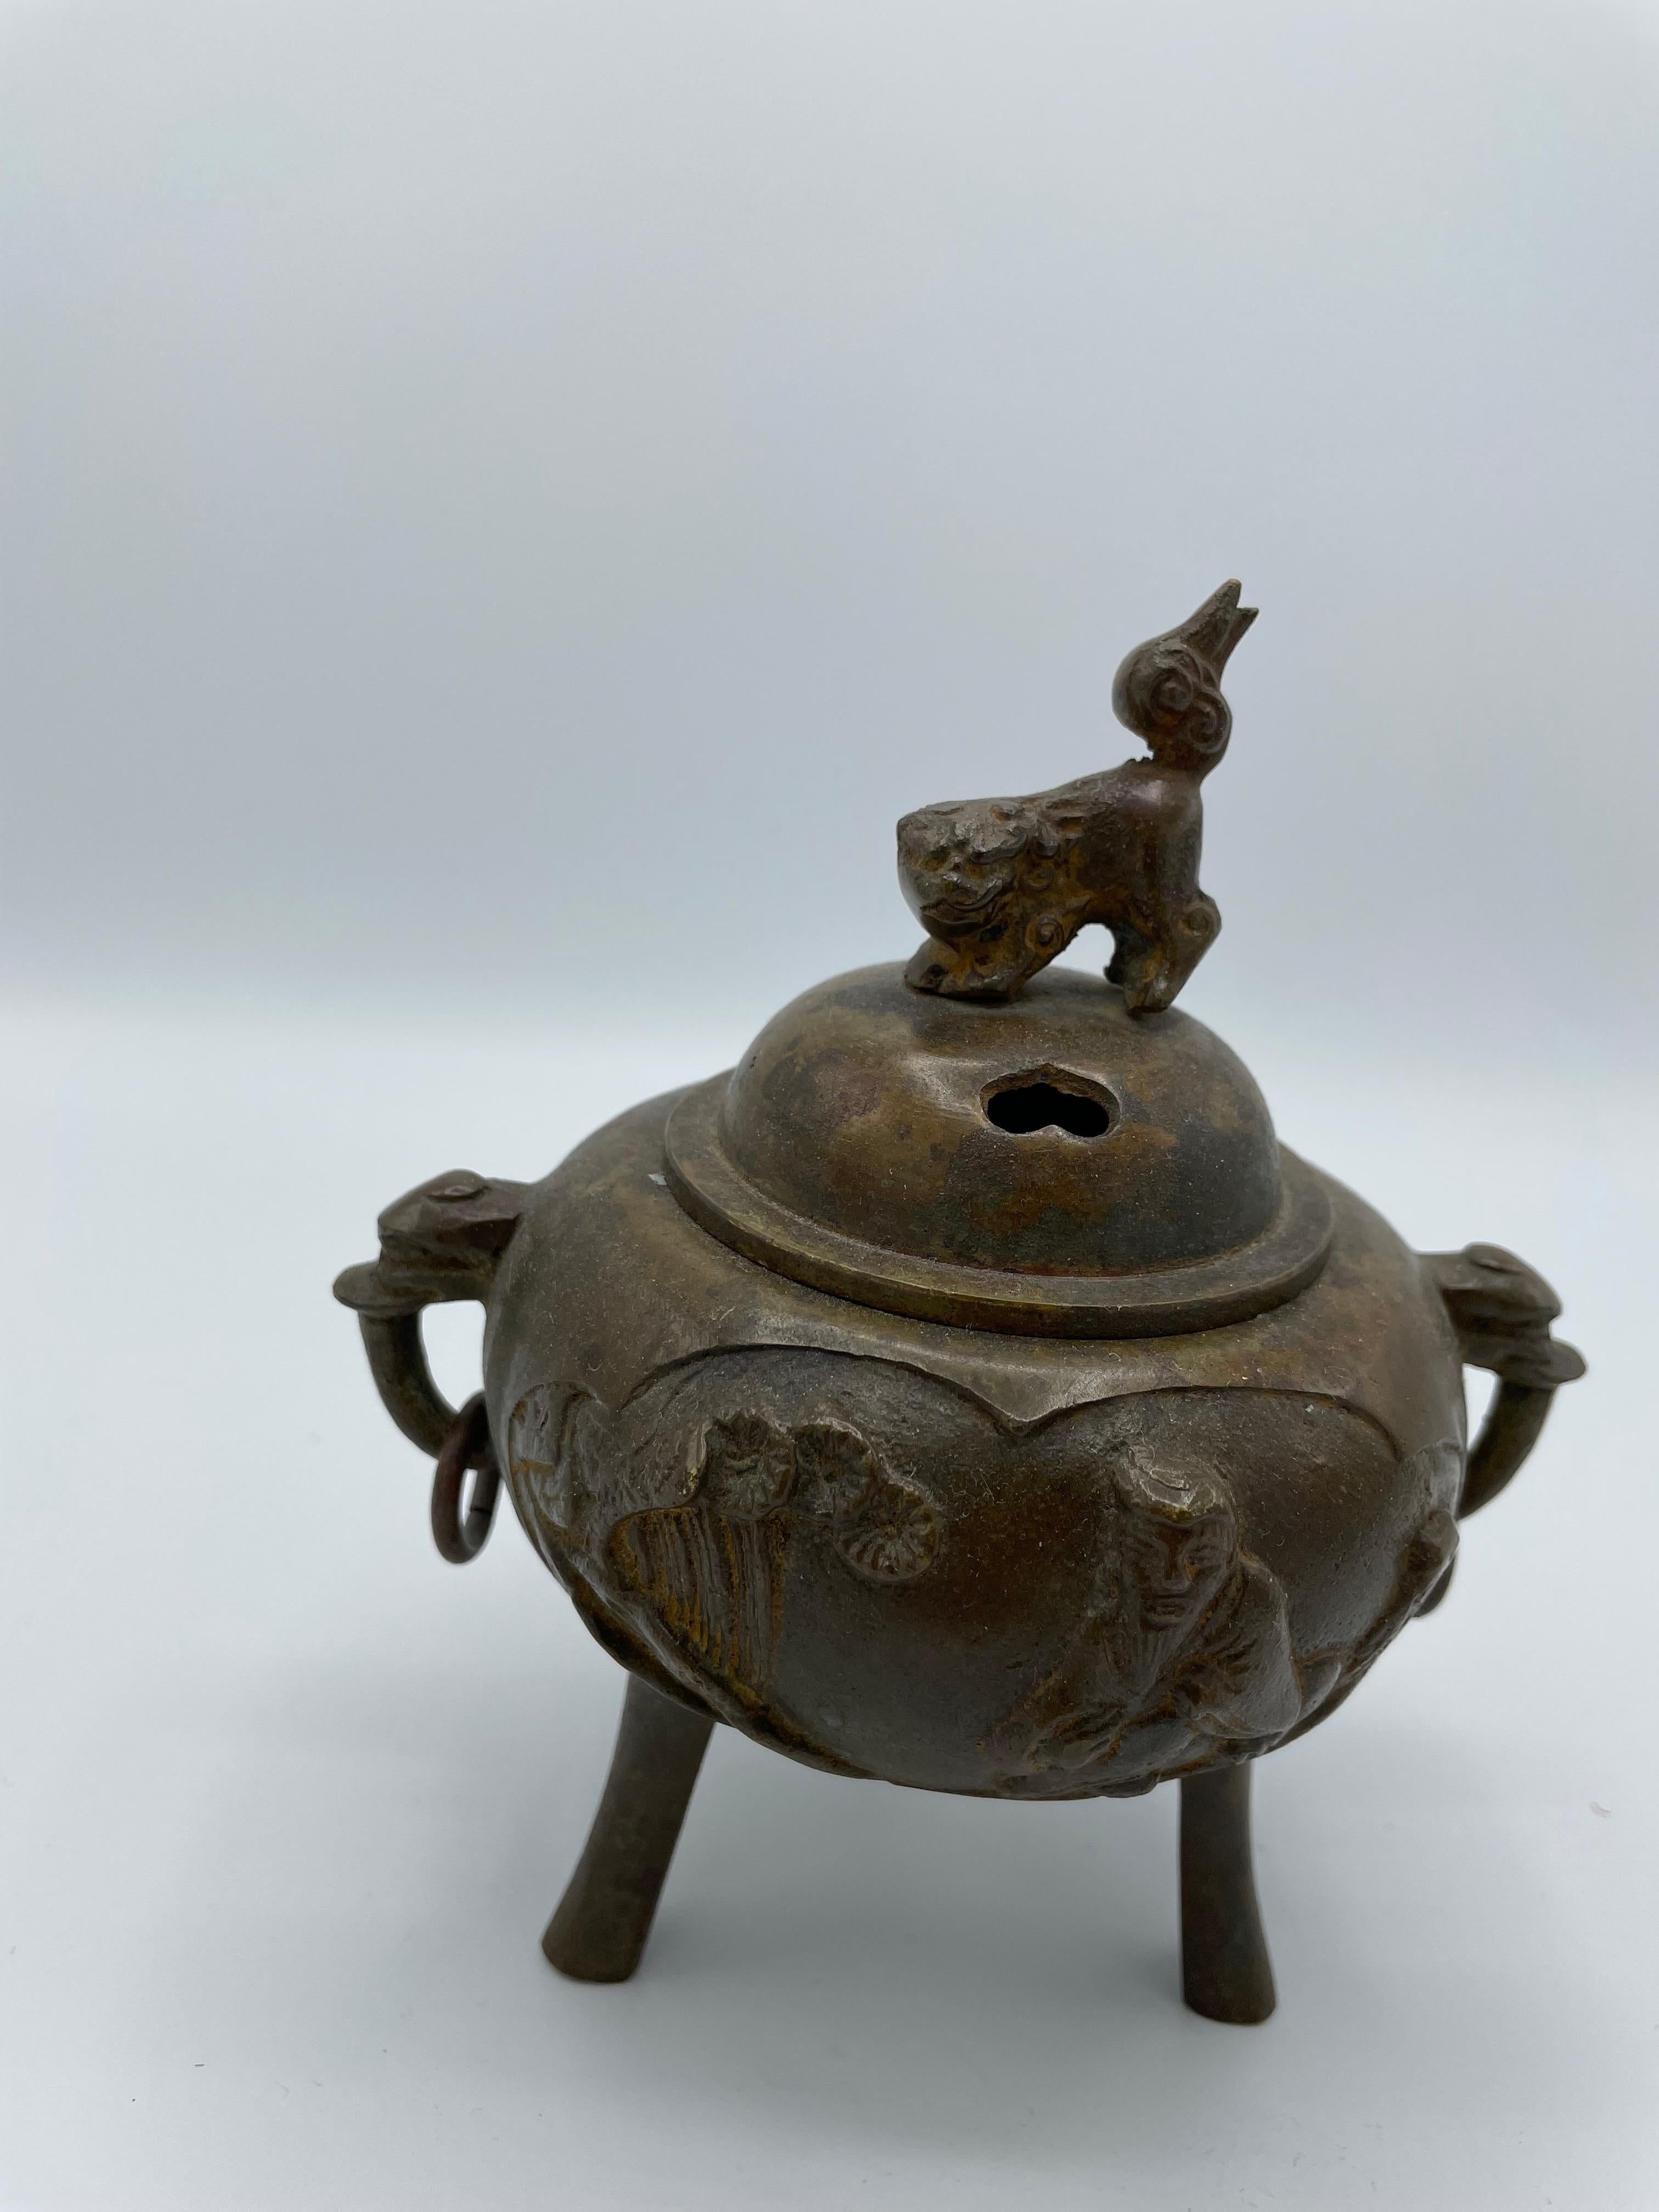 This incense burner was made in 1920s (Taisho era) in Japan.
On the top, there is a Komainu (Lions that guard the entrance or the honden of sanctuaries). 
It can use as incense burner but also as a decoration.

Dimensions: 11 x 13 x H14 cm